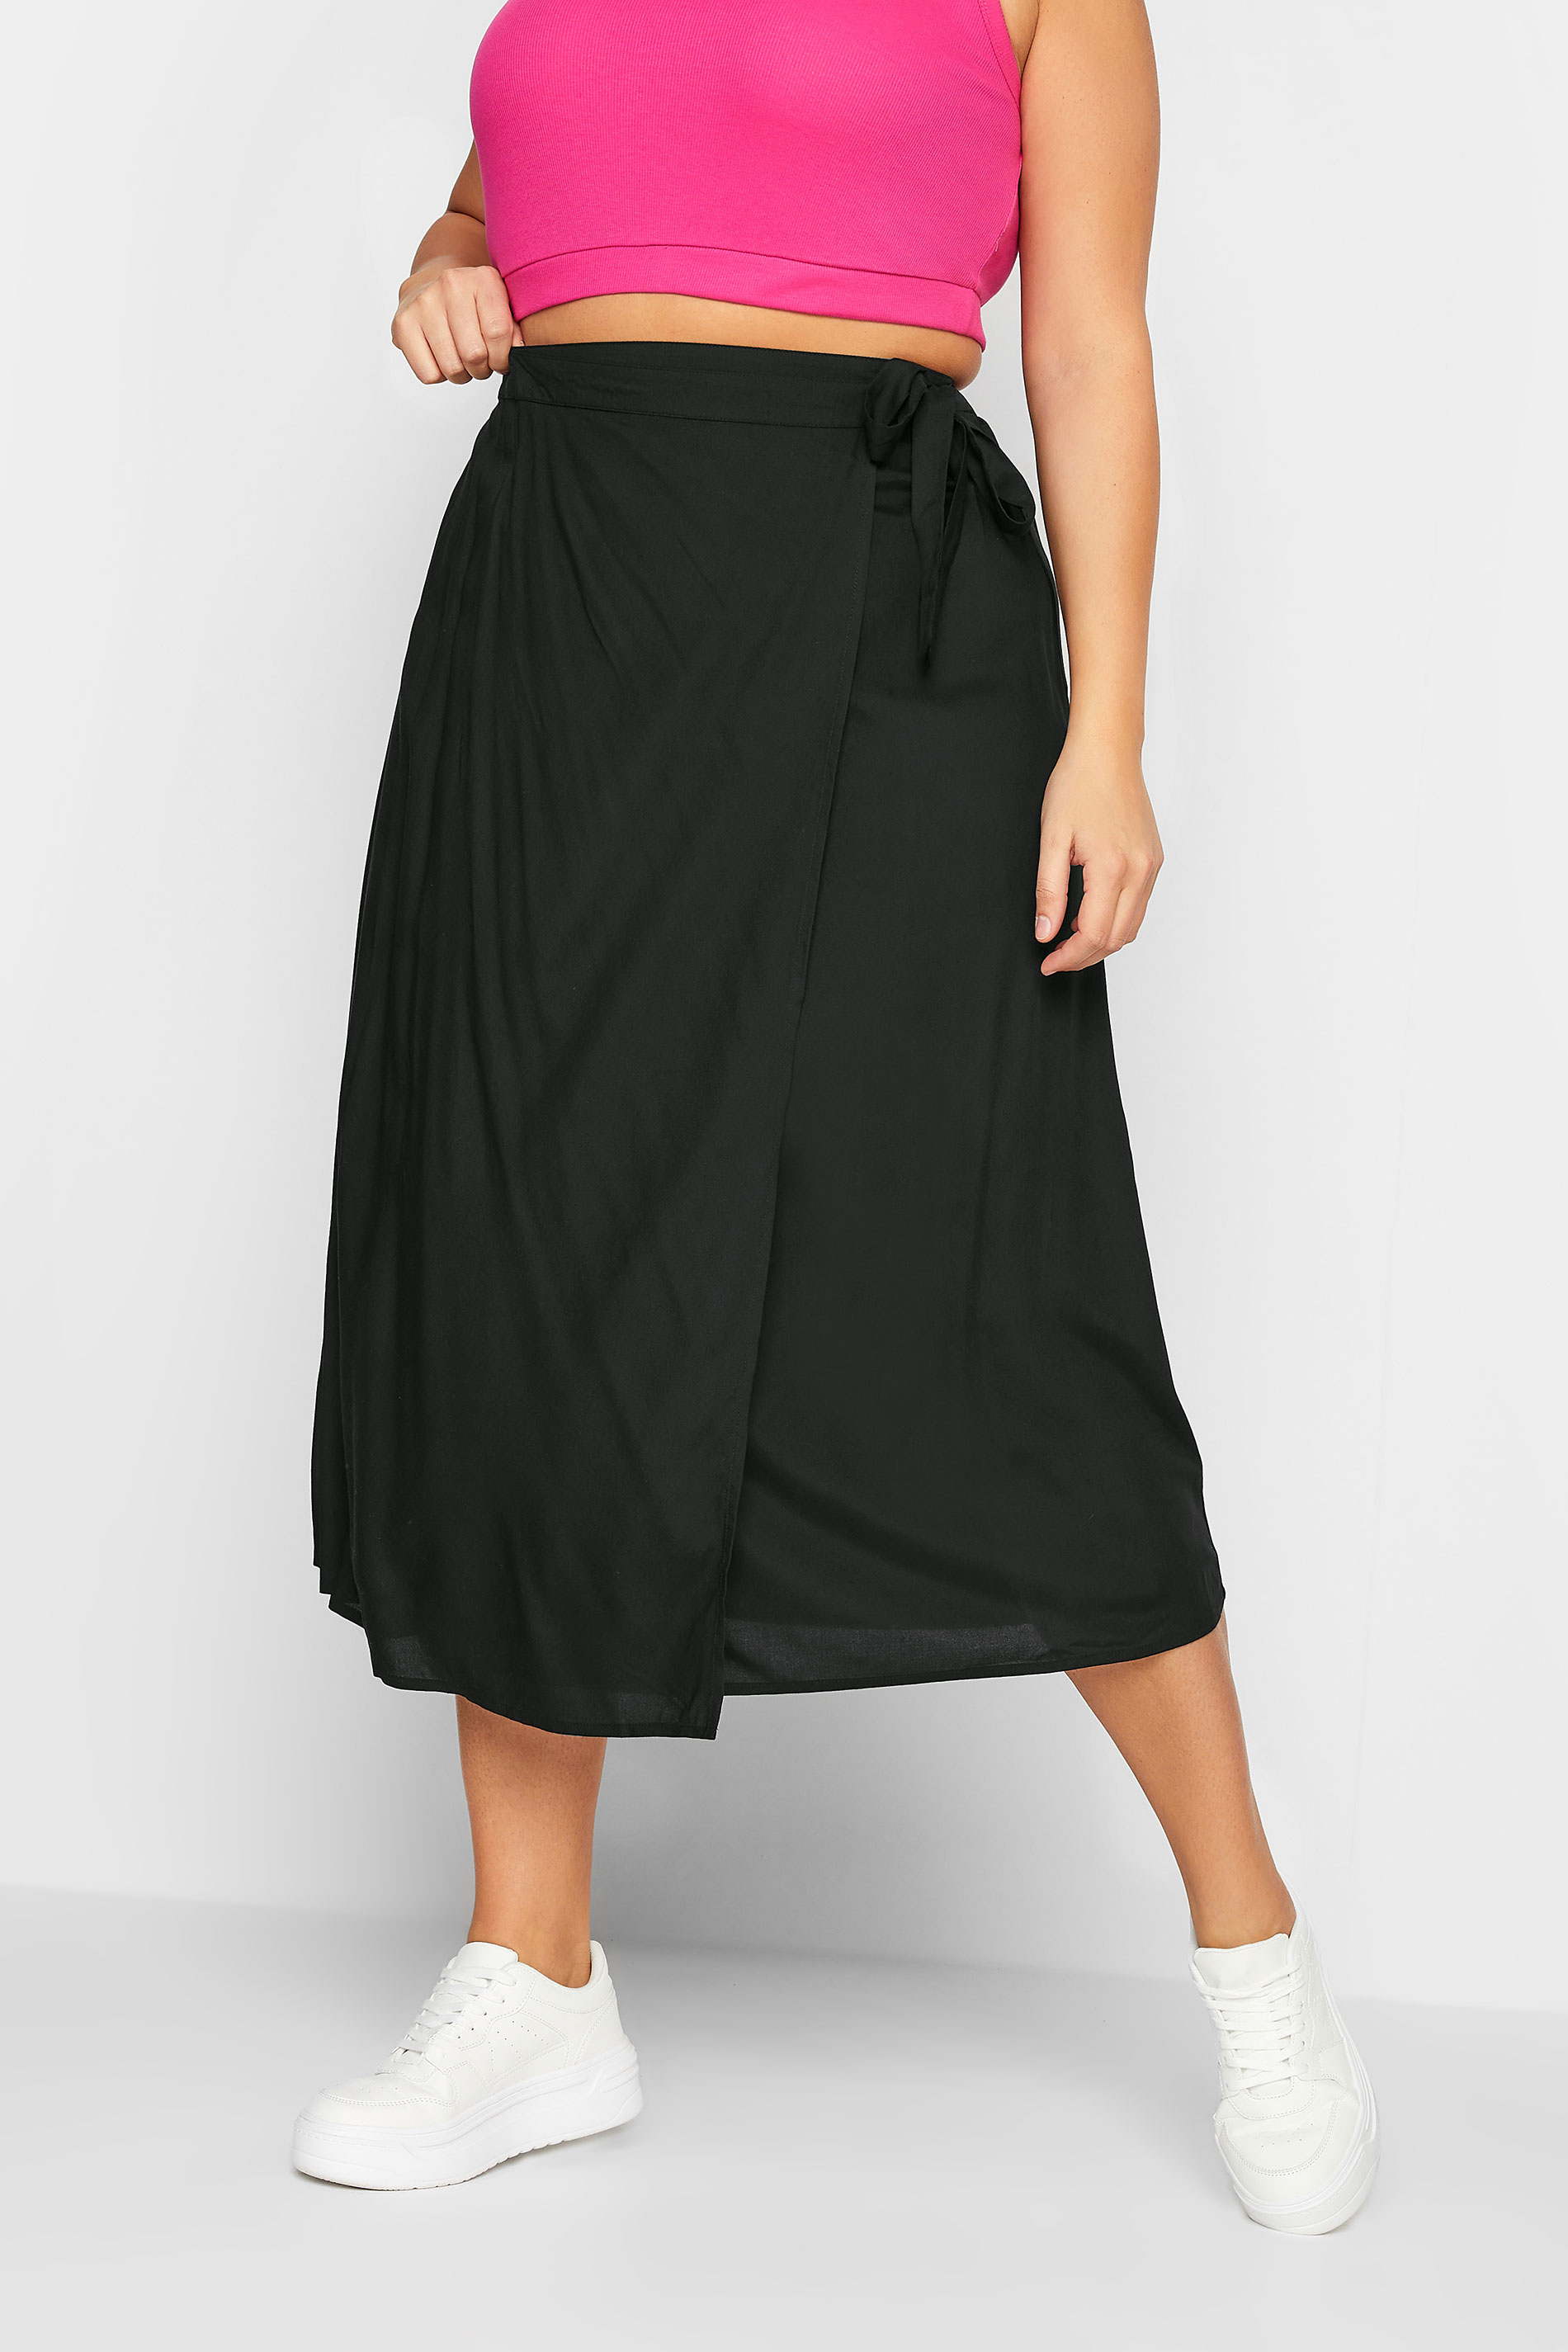 LIMITED COLLECTION Plus Size Black Wrap Midi Skirt | Yours Clothing 1